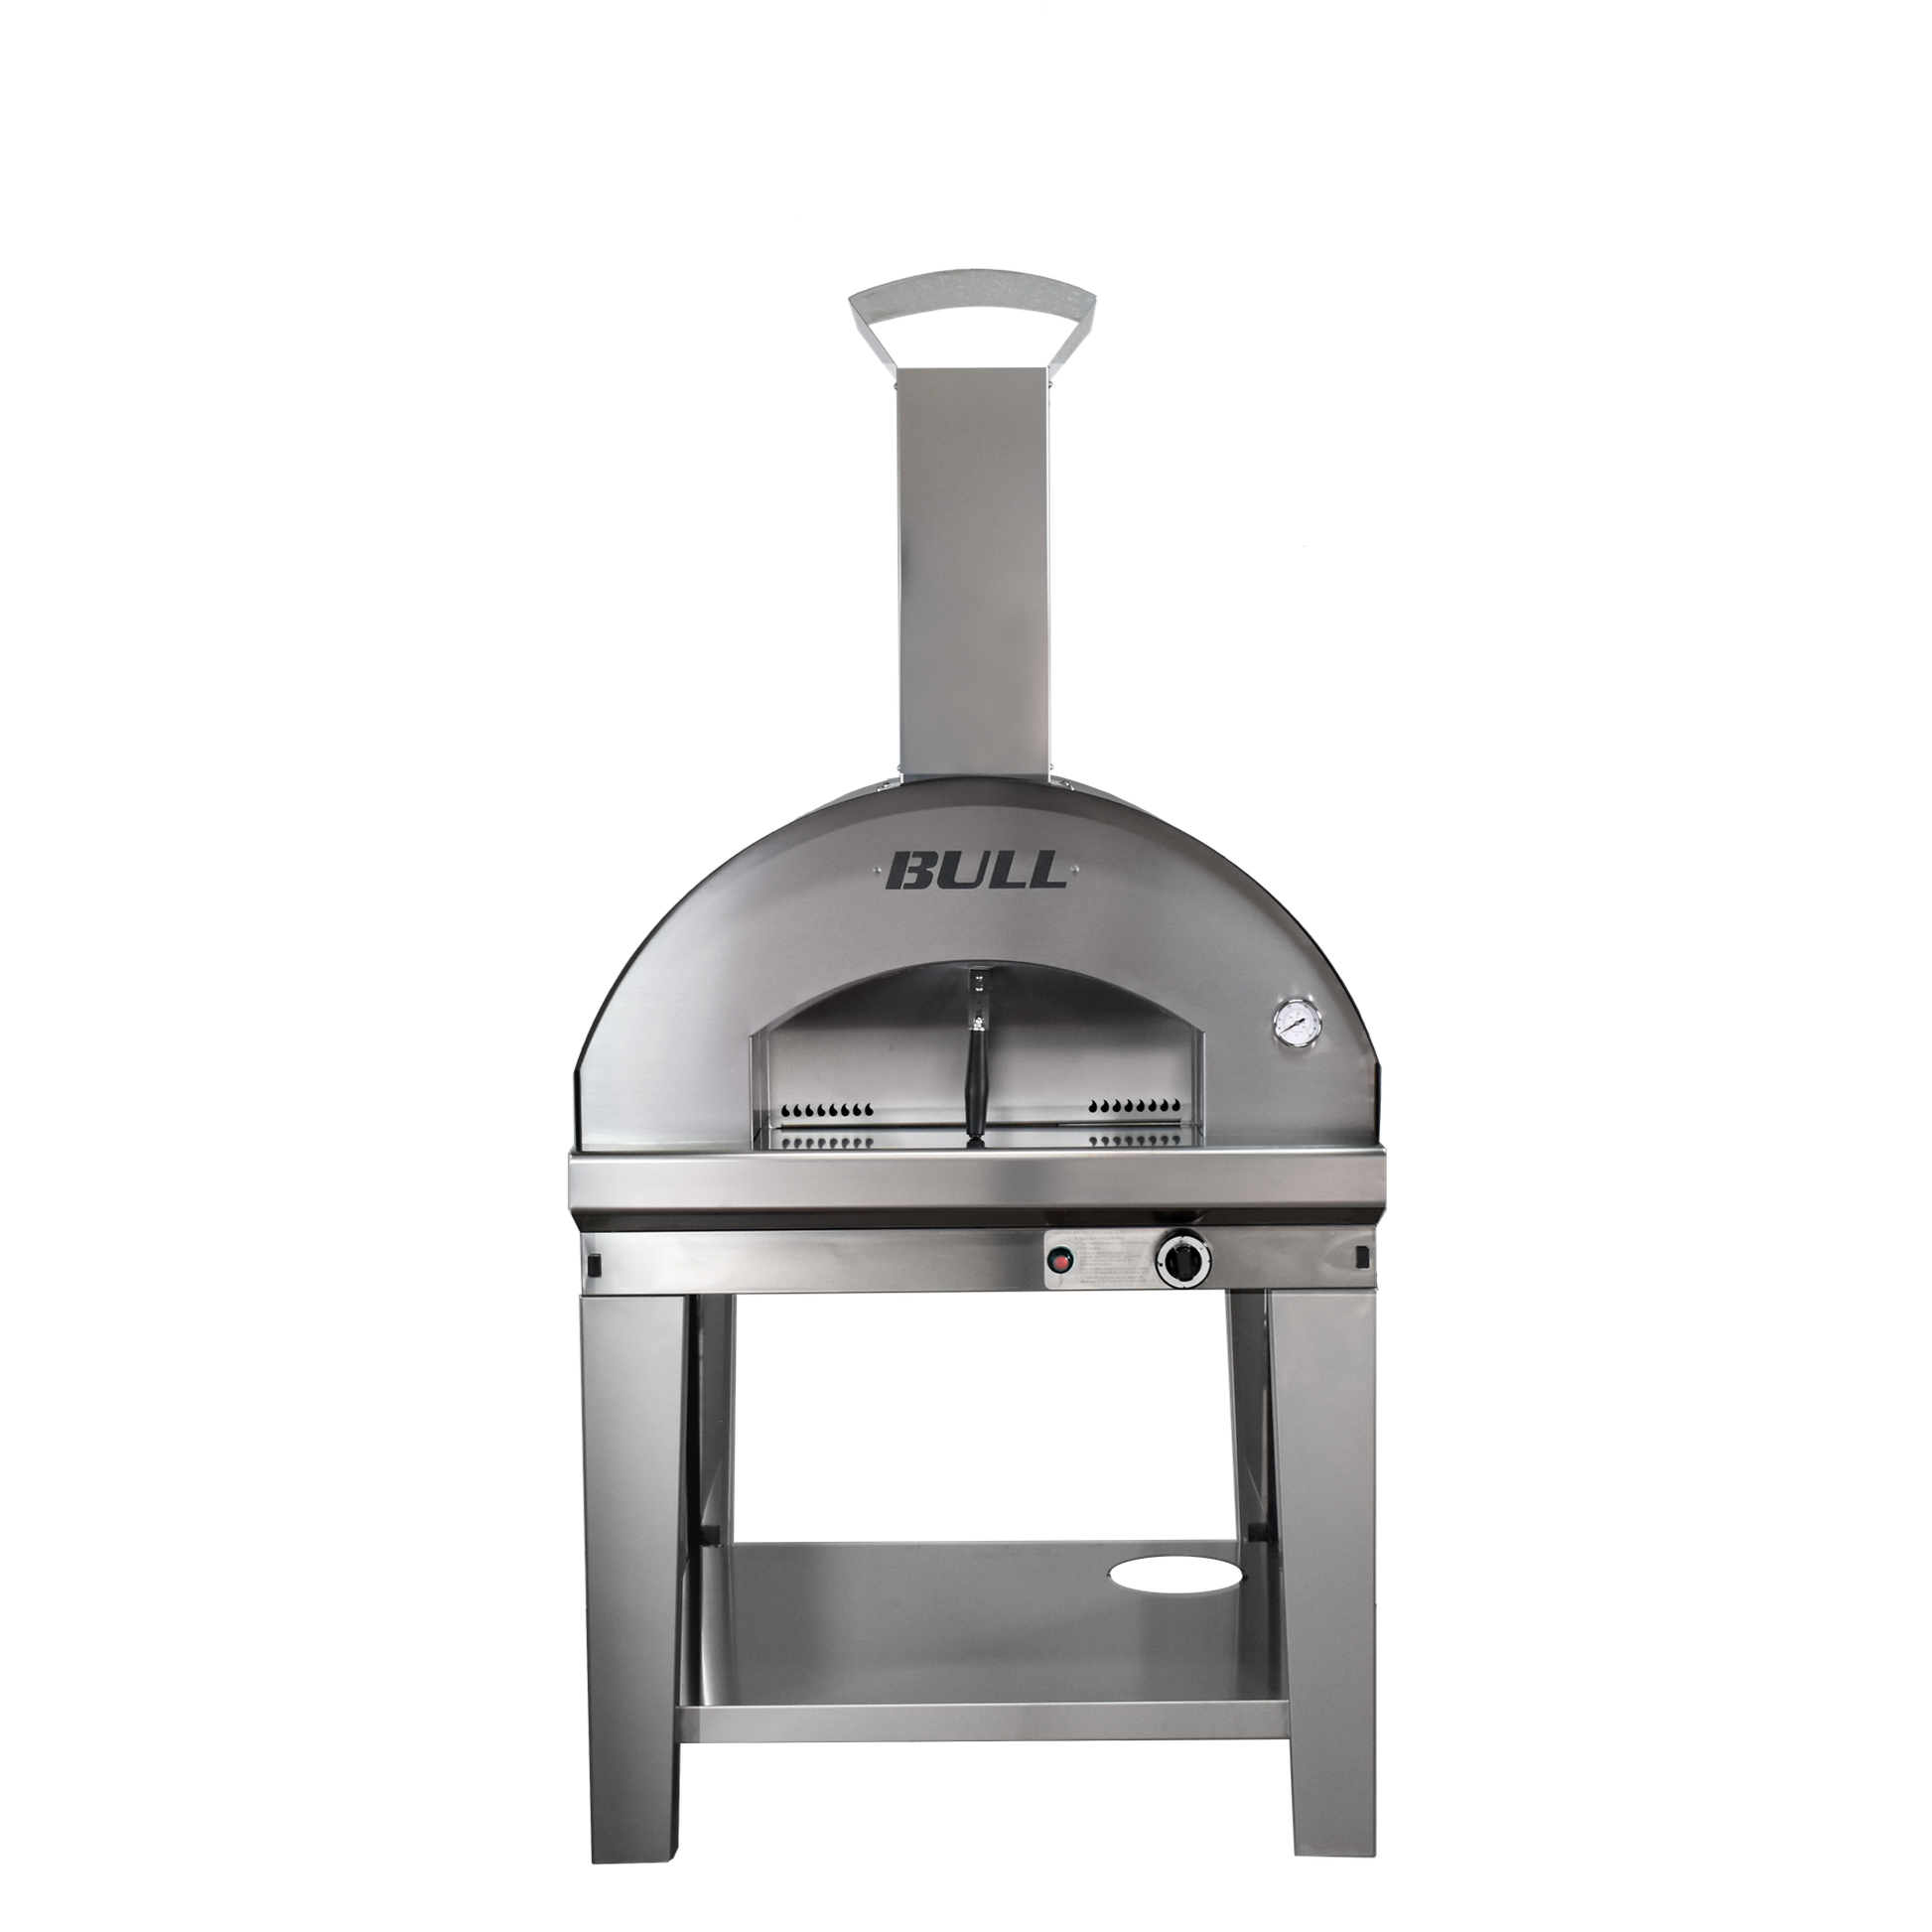 BULL GAS FUELLED Large Pizza Oven 60x60cm & Complete Oven And Cart